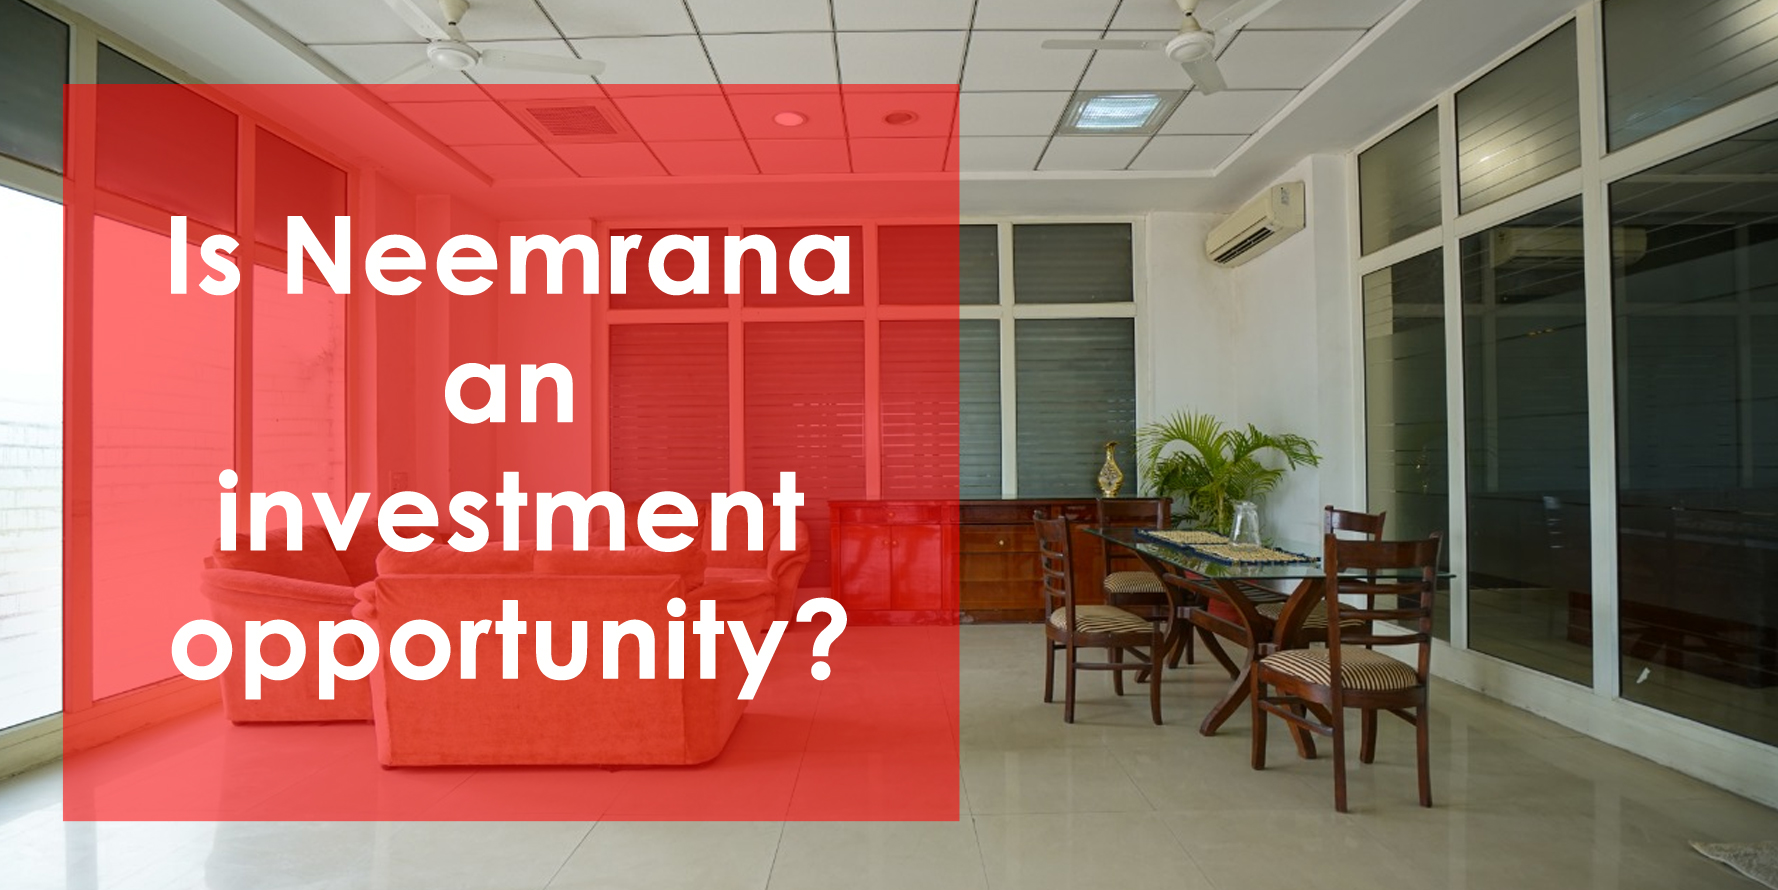 Is Neemrana an investment opportunity